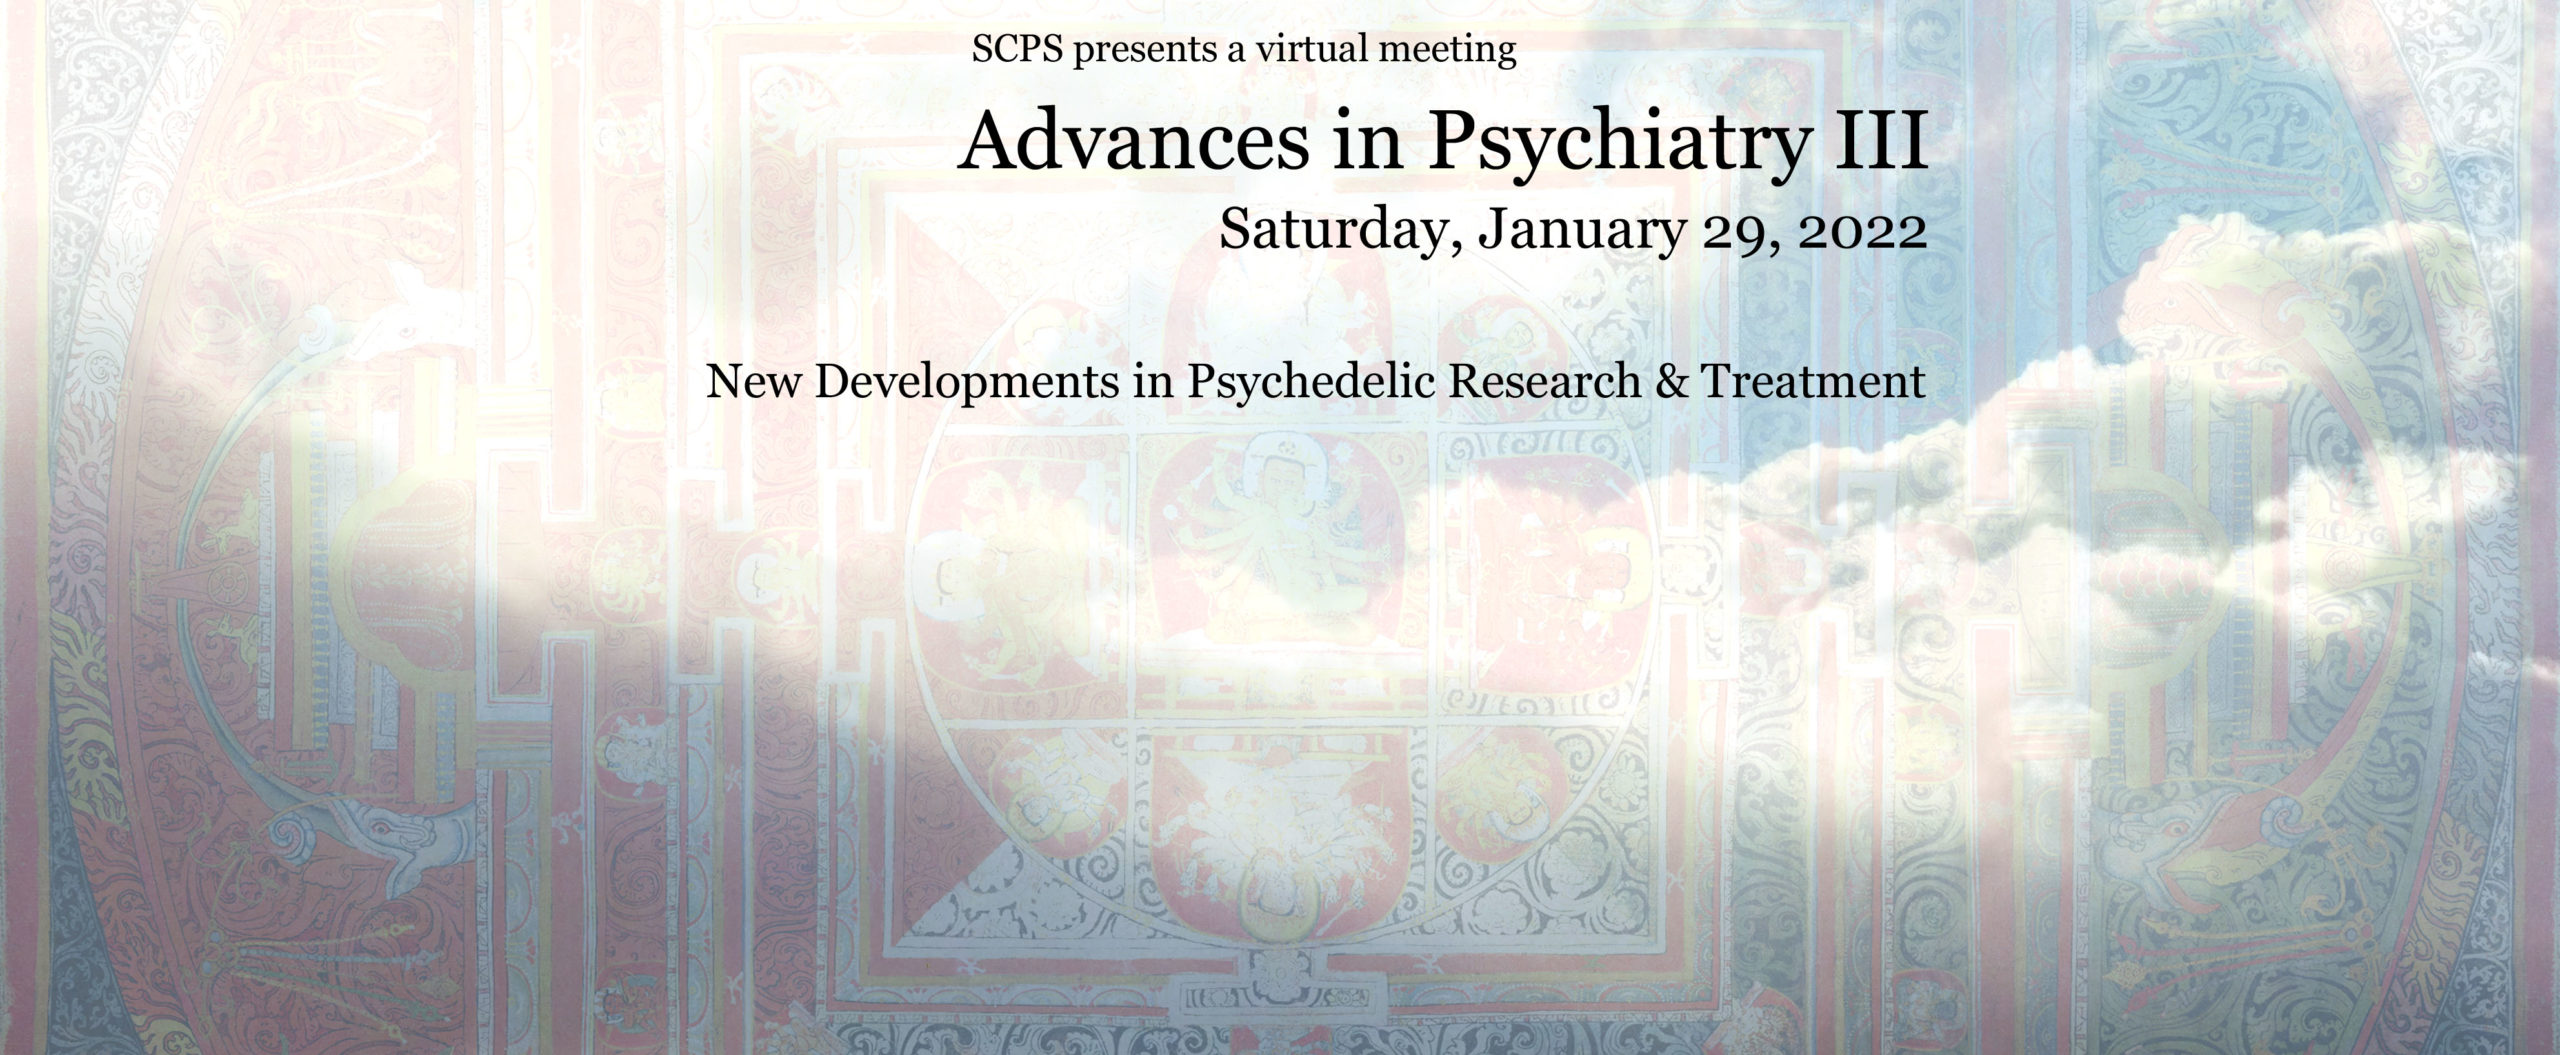 Advances In Psychiatry 3 - Psychedelic Research & Treatment